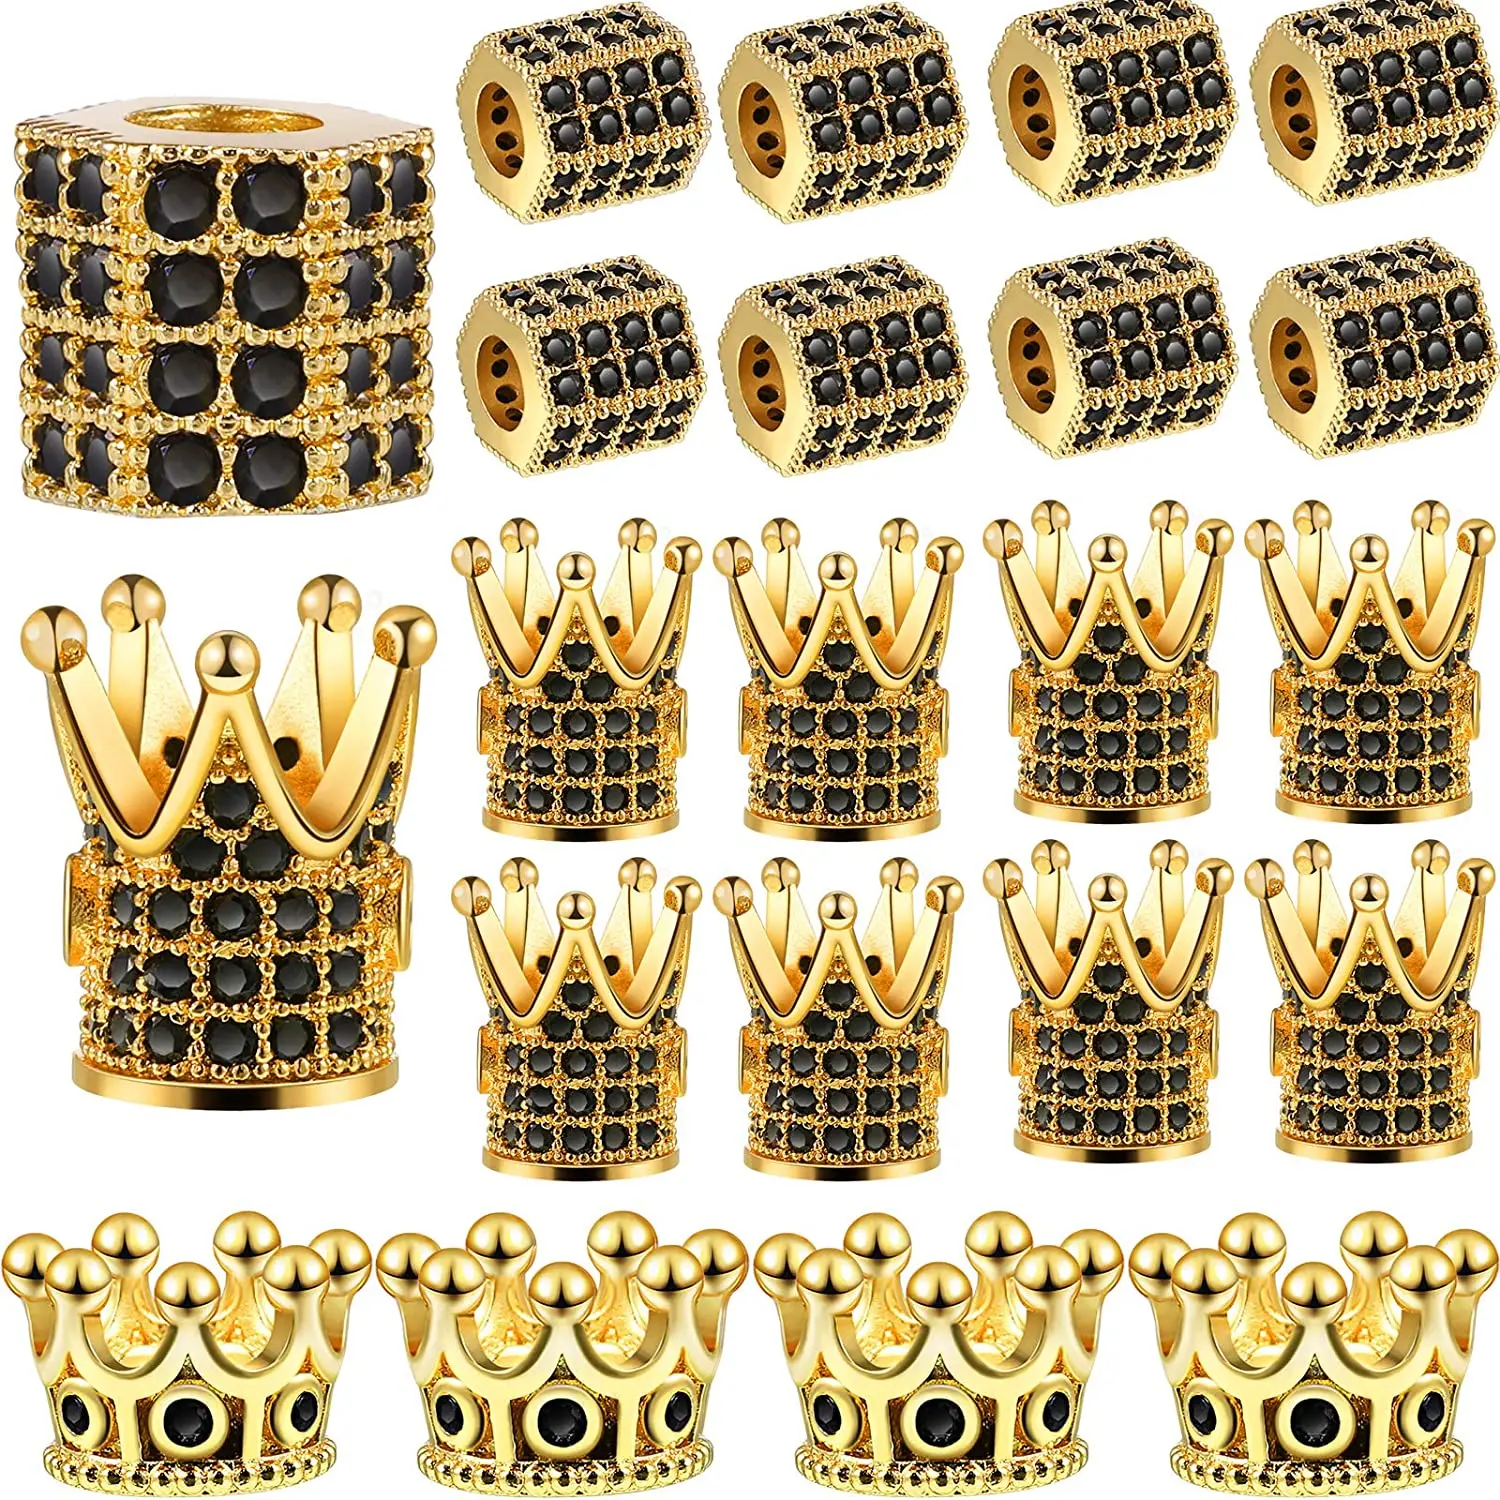 

20 Pieces King Crown Charms Beads Hexagon Spacer Beads Set Rhinestone Charm Big Hole Bracelet for DIY Jewelry Crafts Making